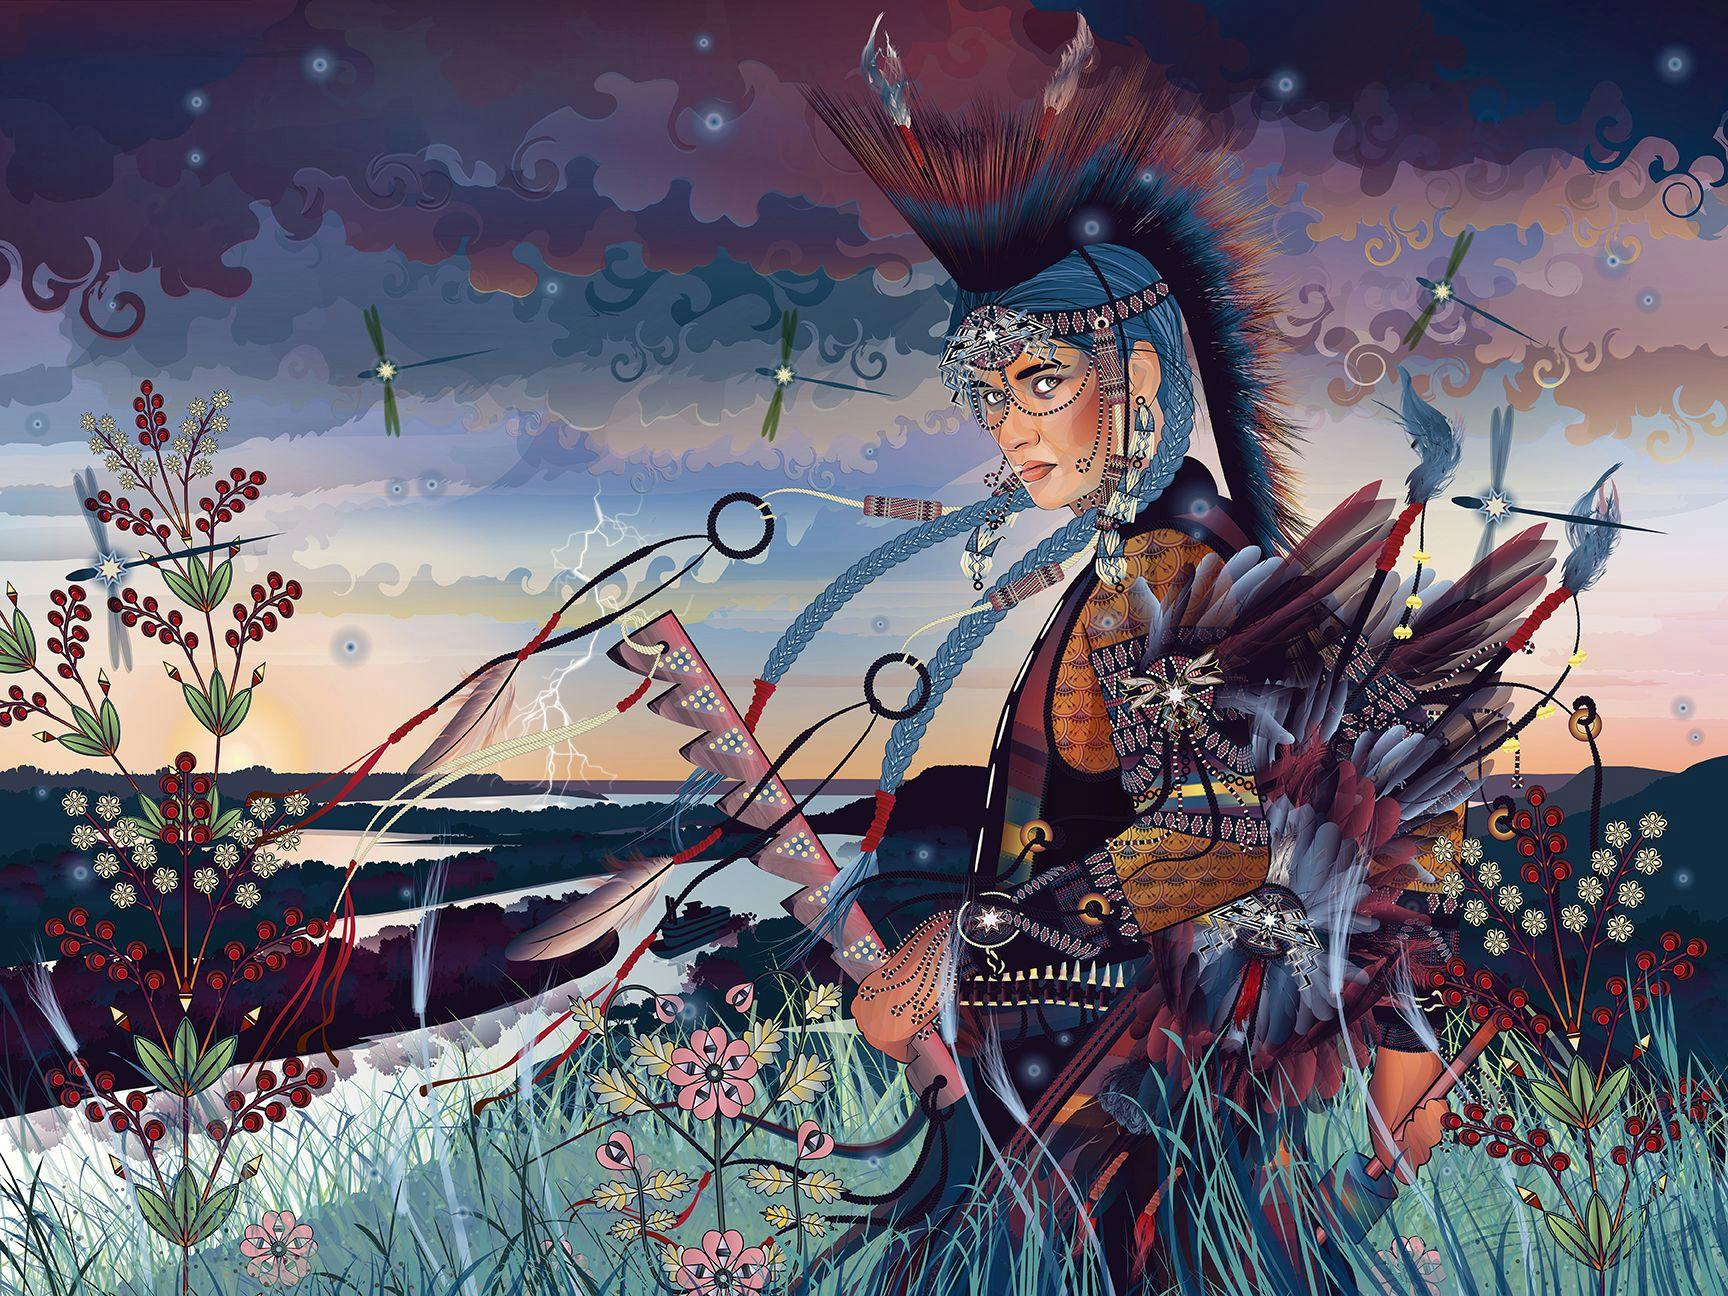 A digital illustration of Wakinyan, the Dakota spirit of thunder, looking over the Mississippi River at Hemnican (Barn Bluff) in Red Wing, Minnesota. Wakinyan's patterned garments and long blue braids flow in the wind alongside stylized flowers, clouds, grasses, and water, rendered in cool blues, greens, purples, and pinks.